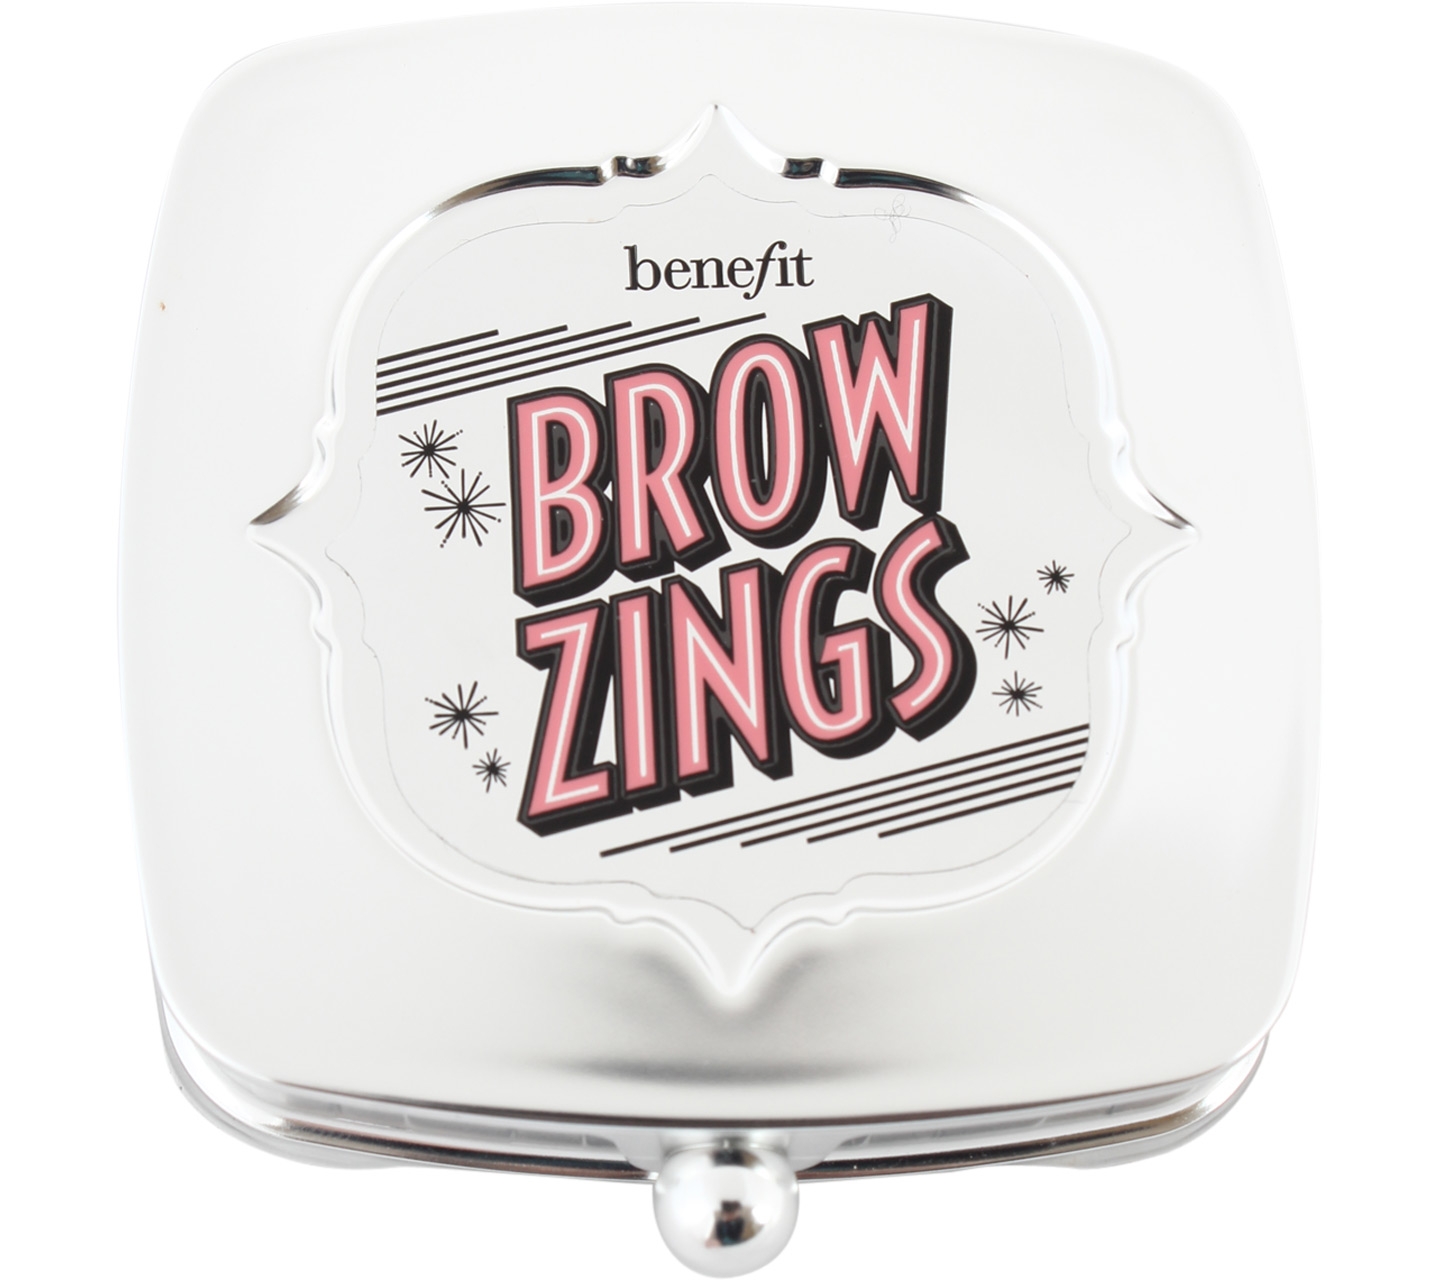 Benefit Brow Zings (5) Sets and Palette